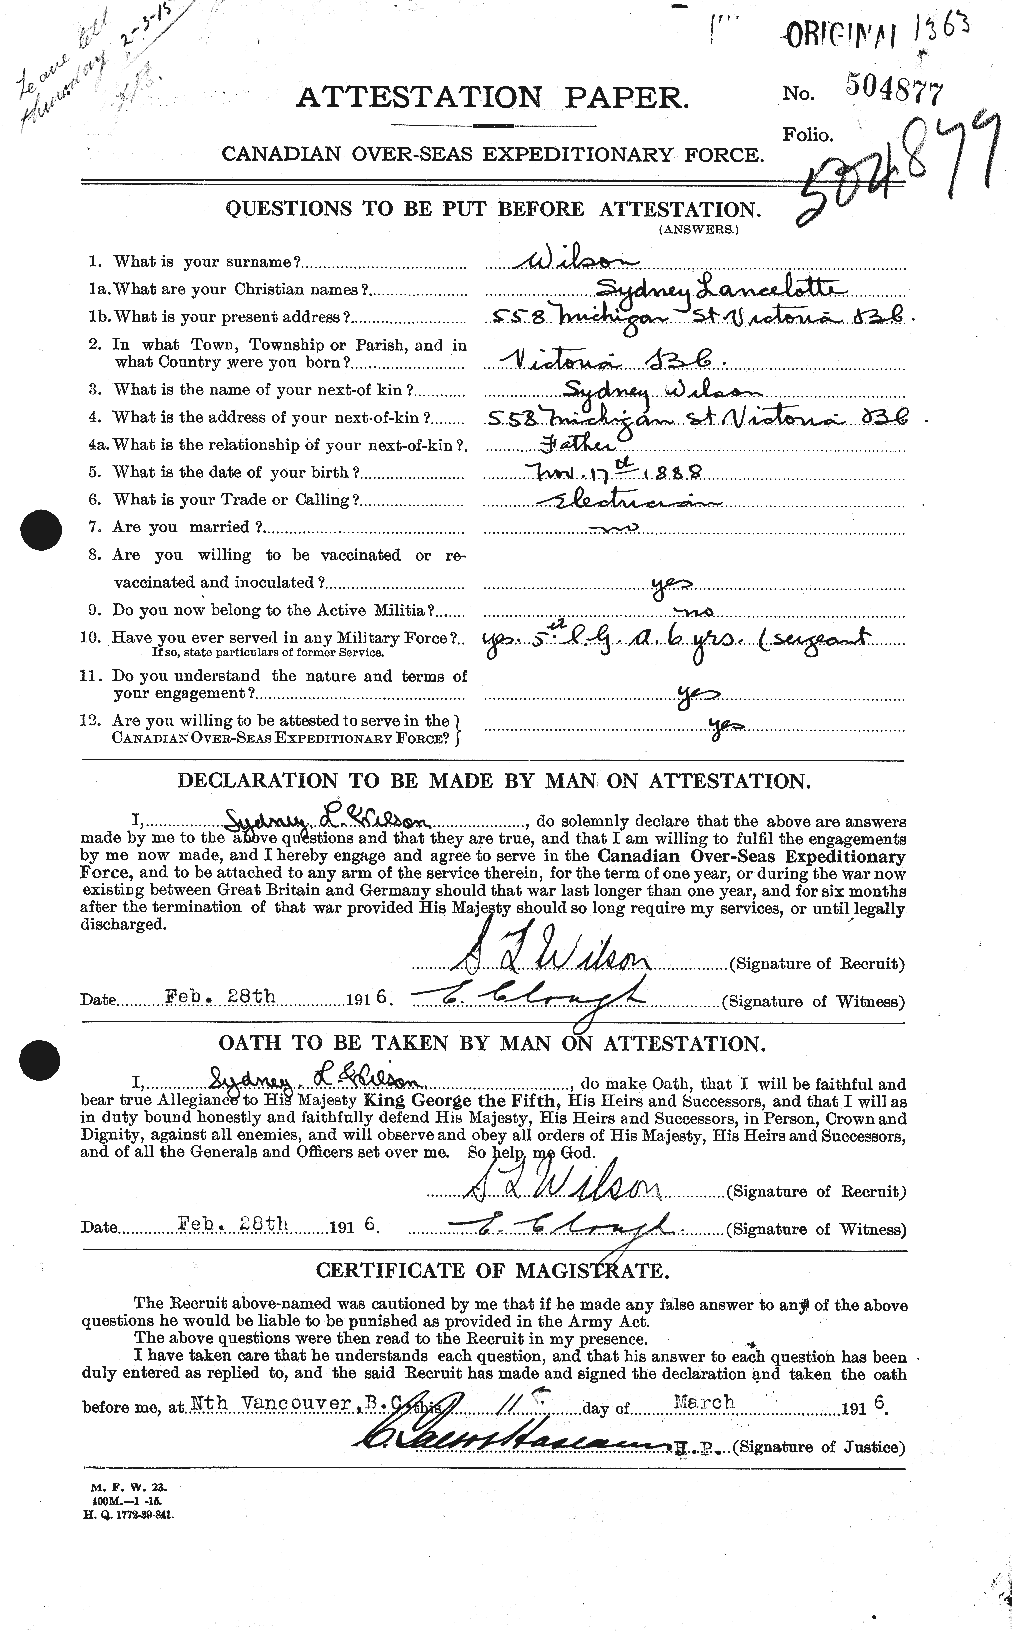 Personnel Records of the First World War - CEF 681162a